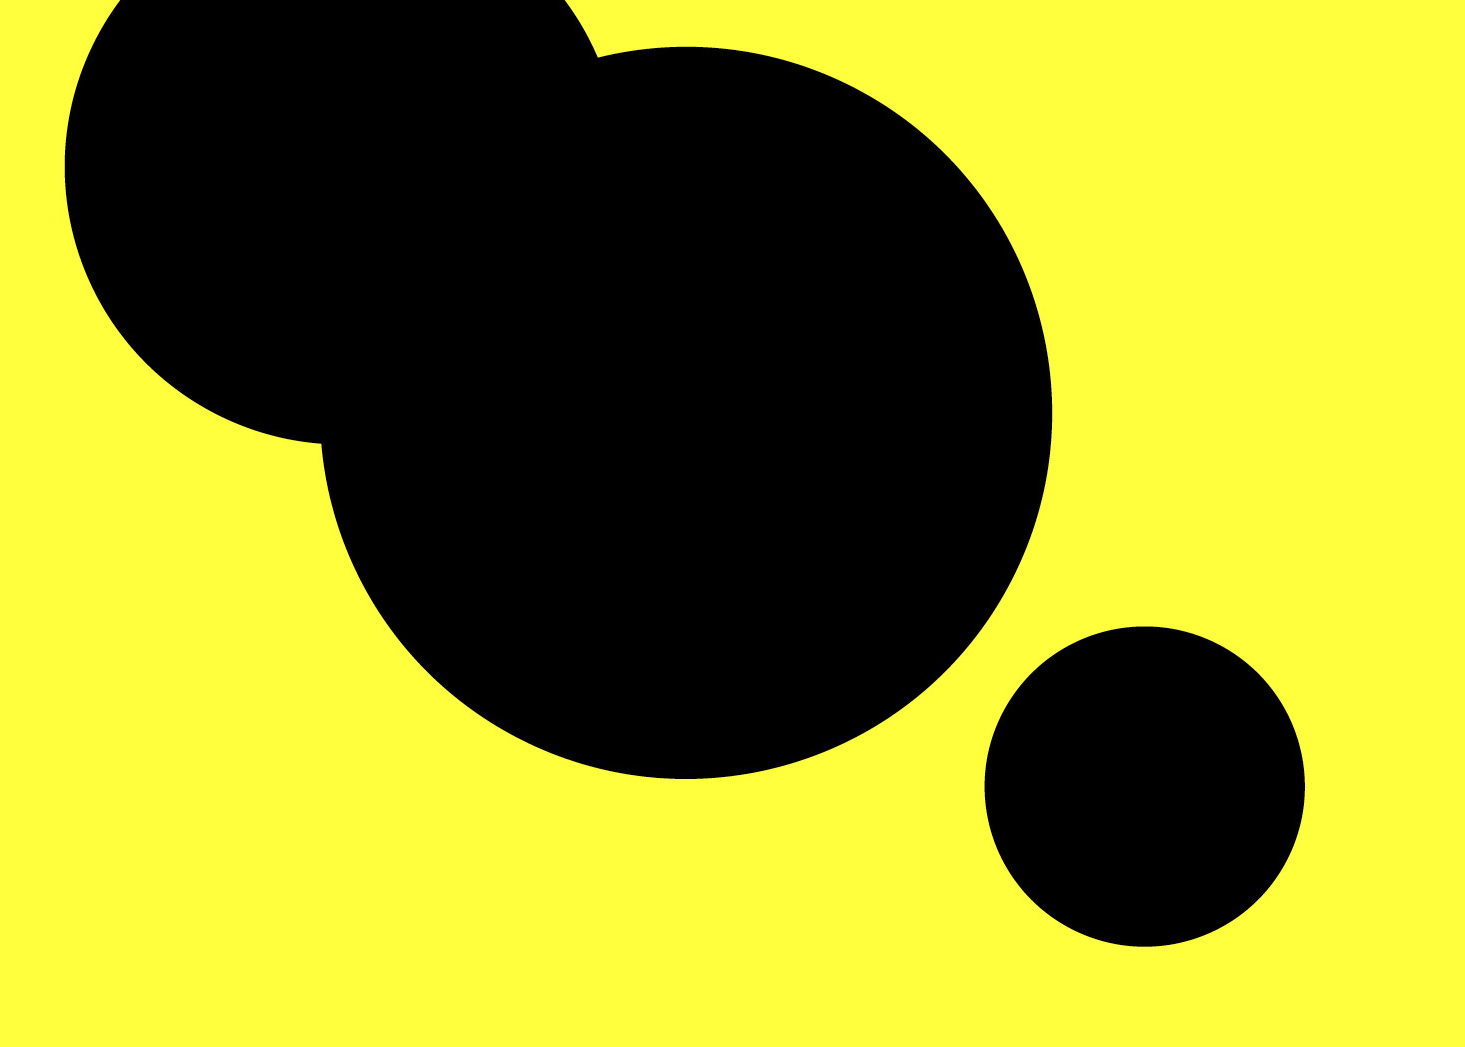 Bright yellow image with black circles